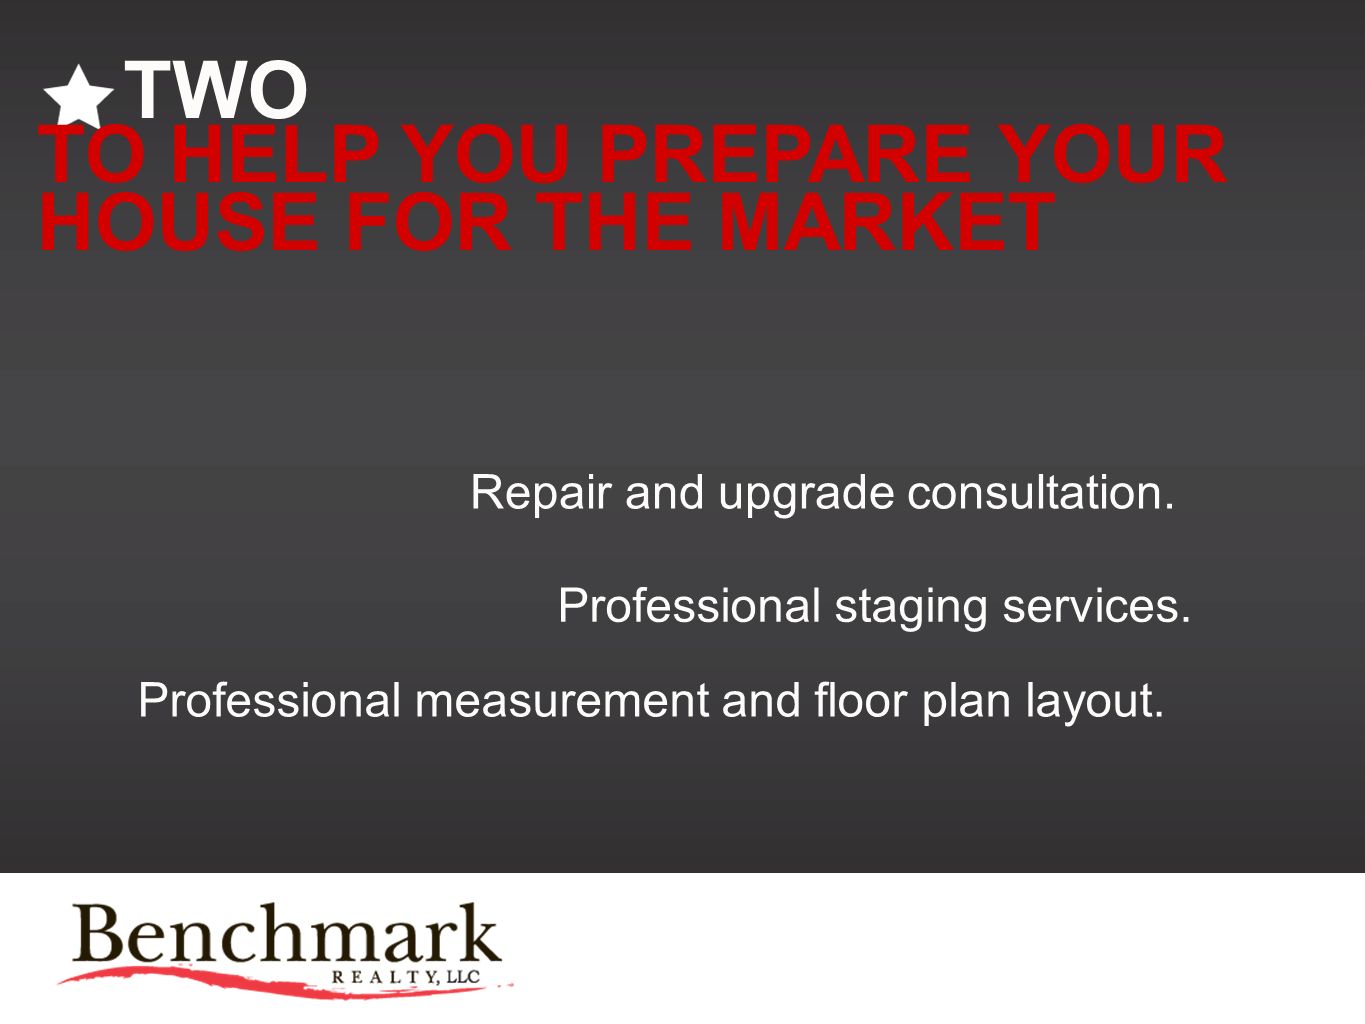 TWO TO HELP YOU PREPARE YOUR HOUSE FOR THE MARKET Repair and upgrade consultation.